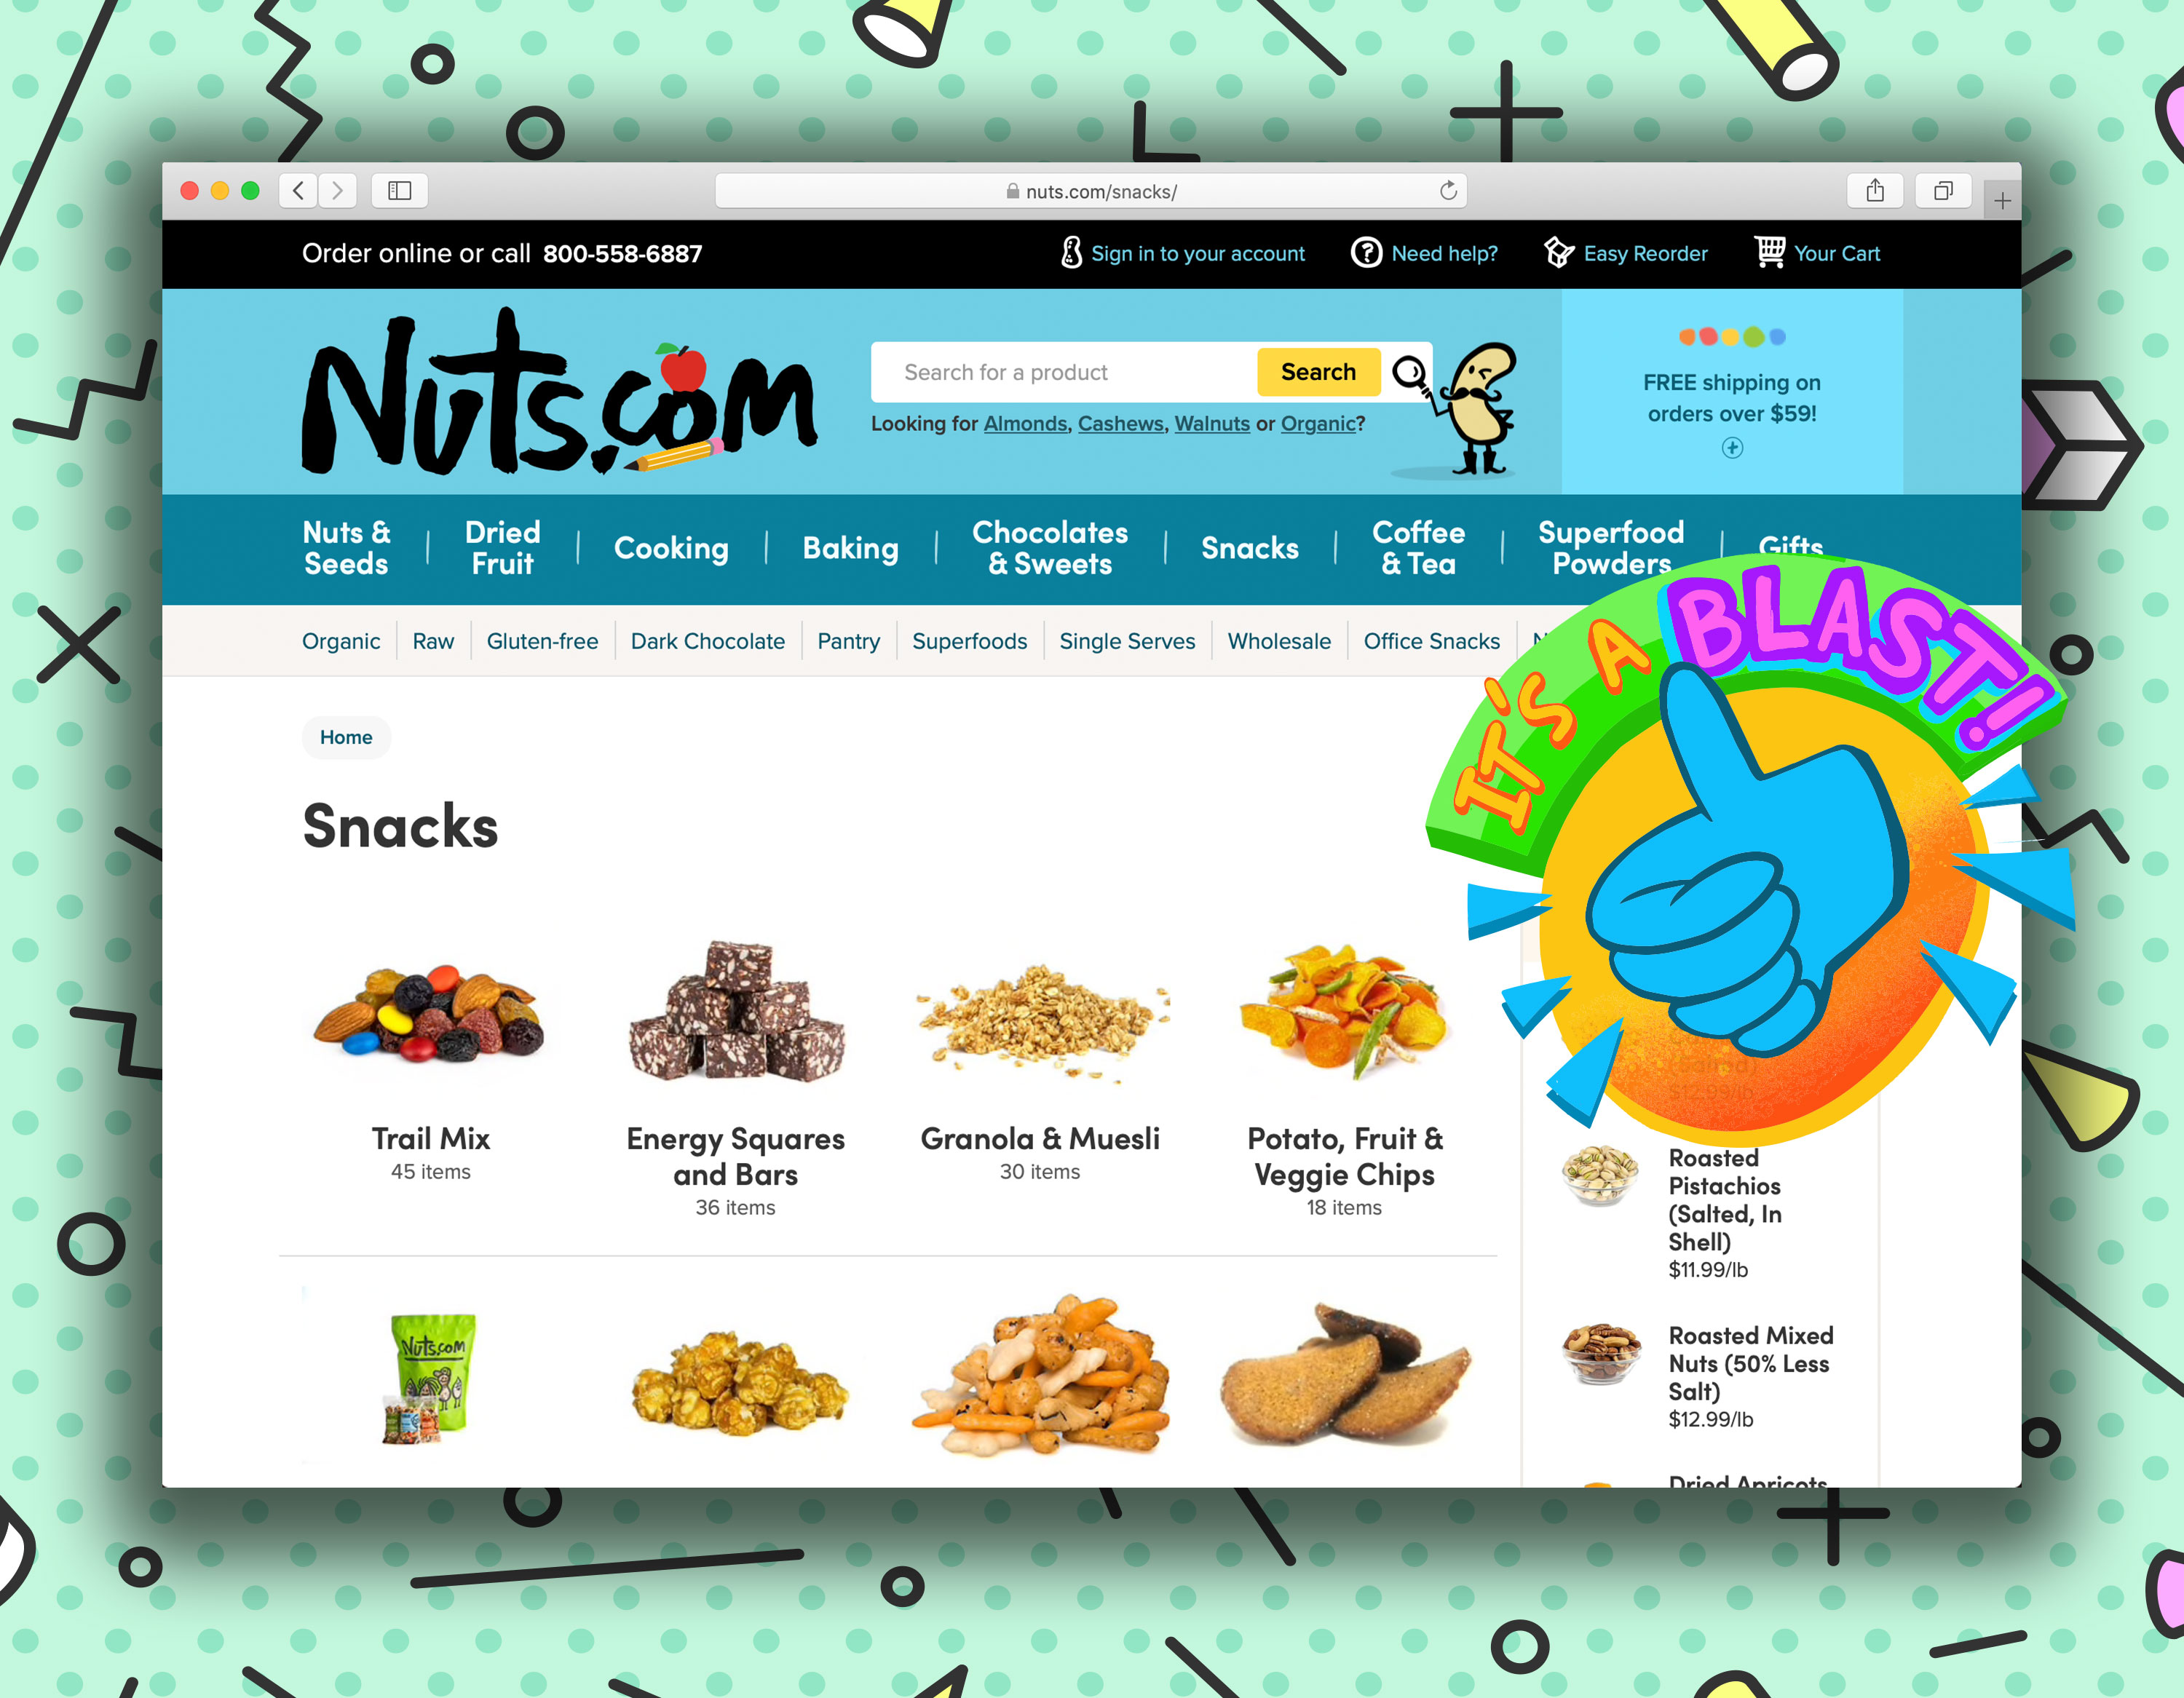 A screengrab of the Nuts.com “snack” page.